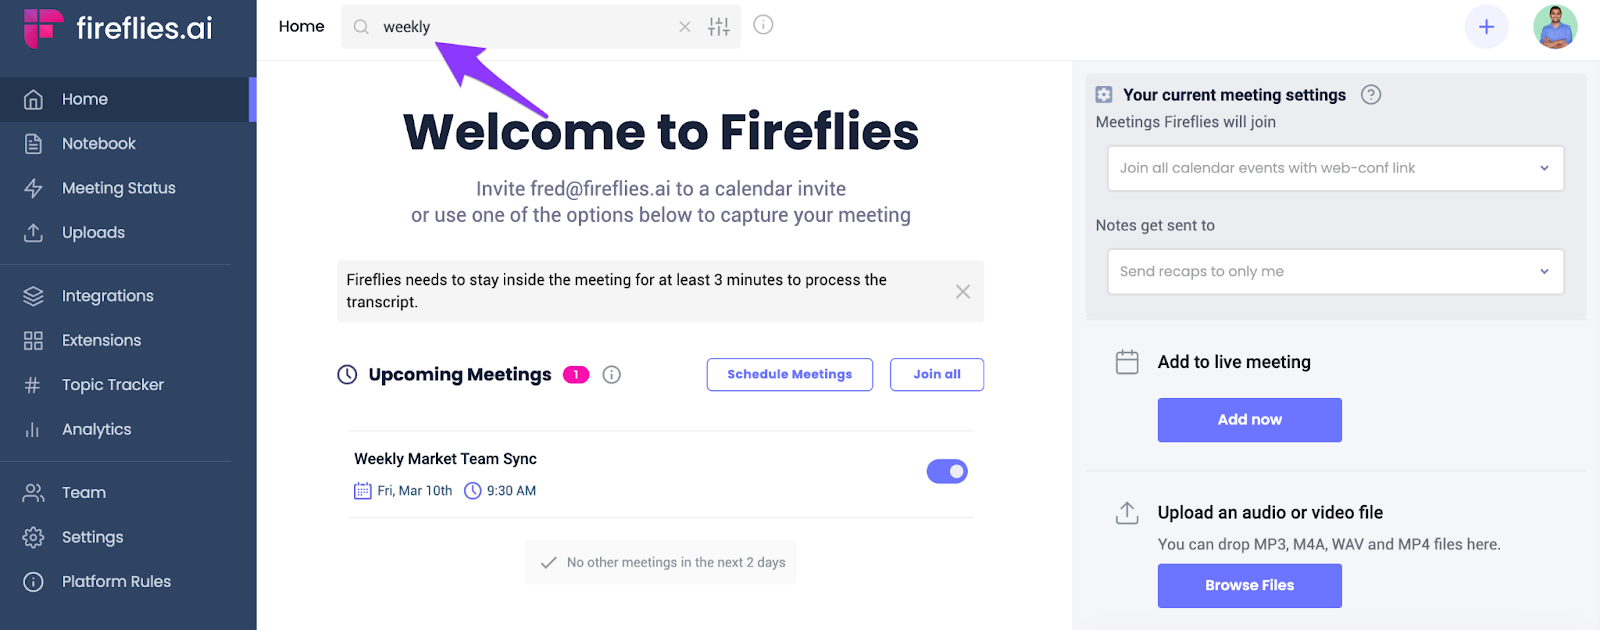 Easily search different types of interviews with Fireflies